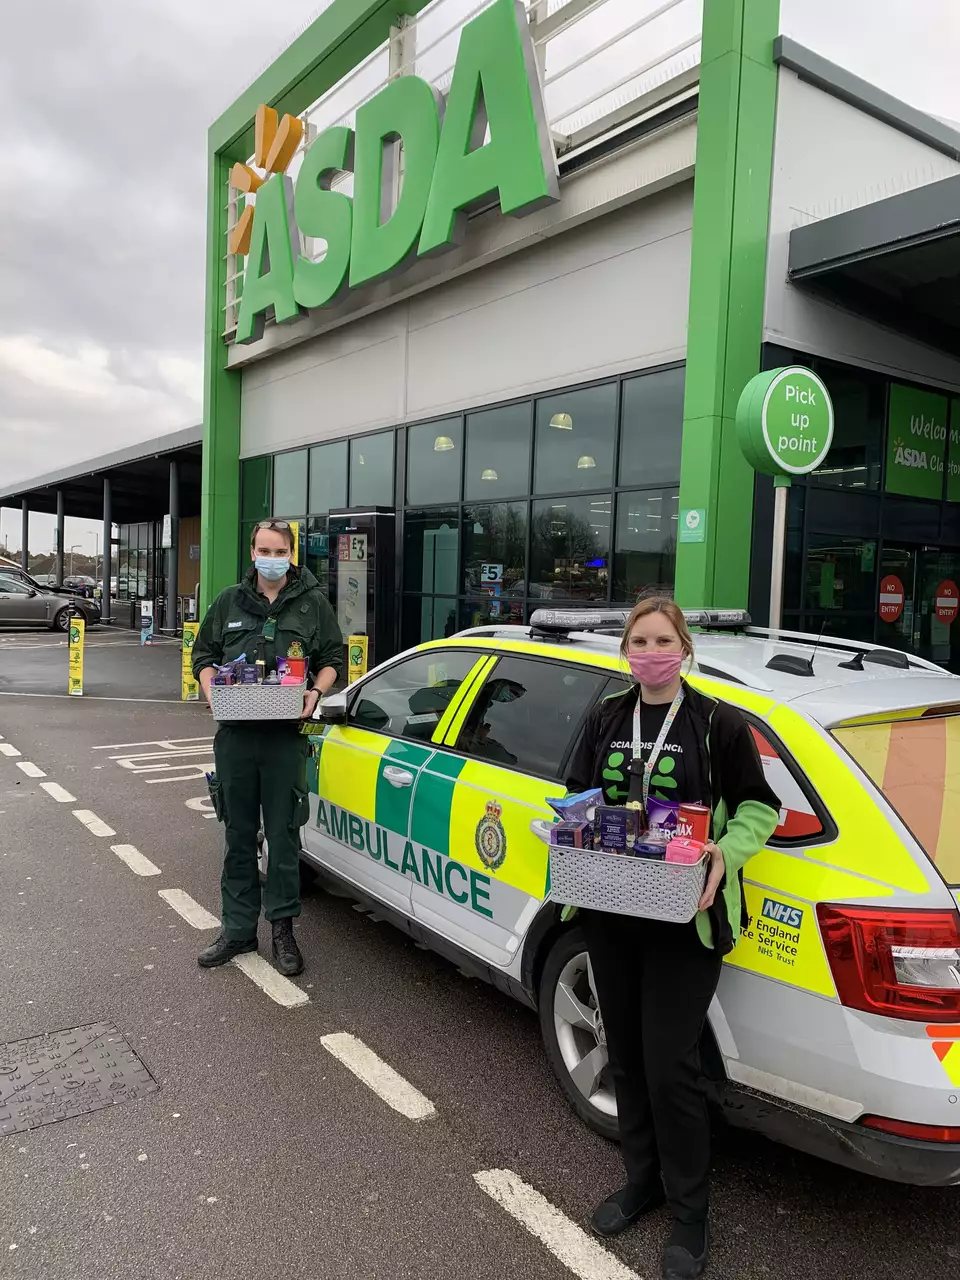 Saying thanks to the East of England Ambulance Service | Asda Clacton-on-Sea